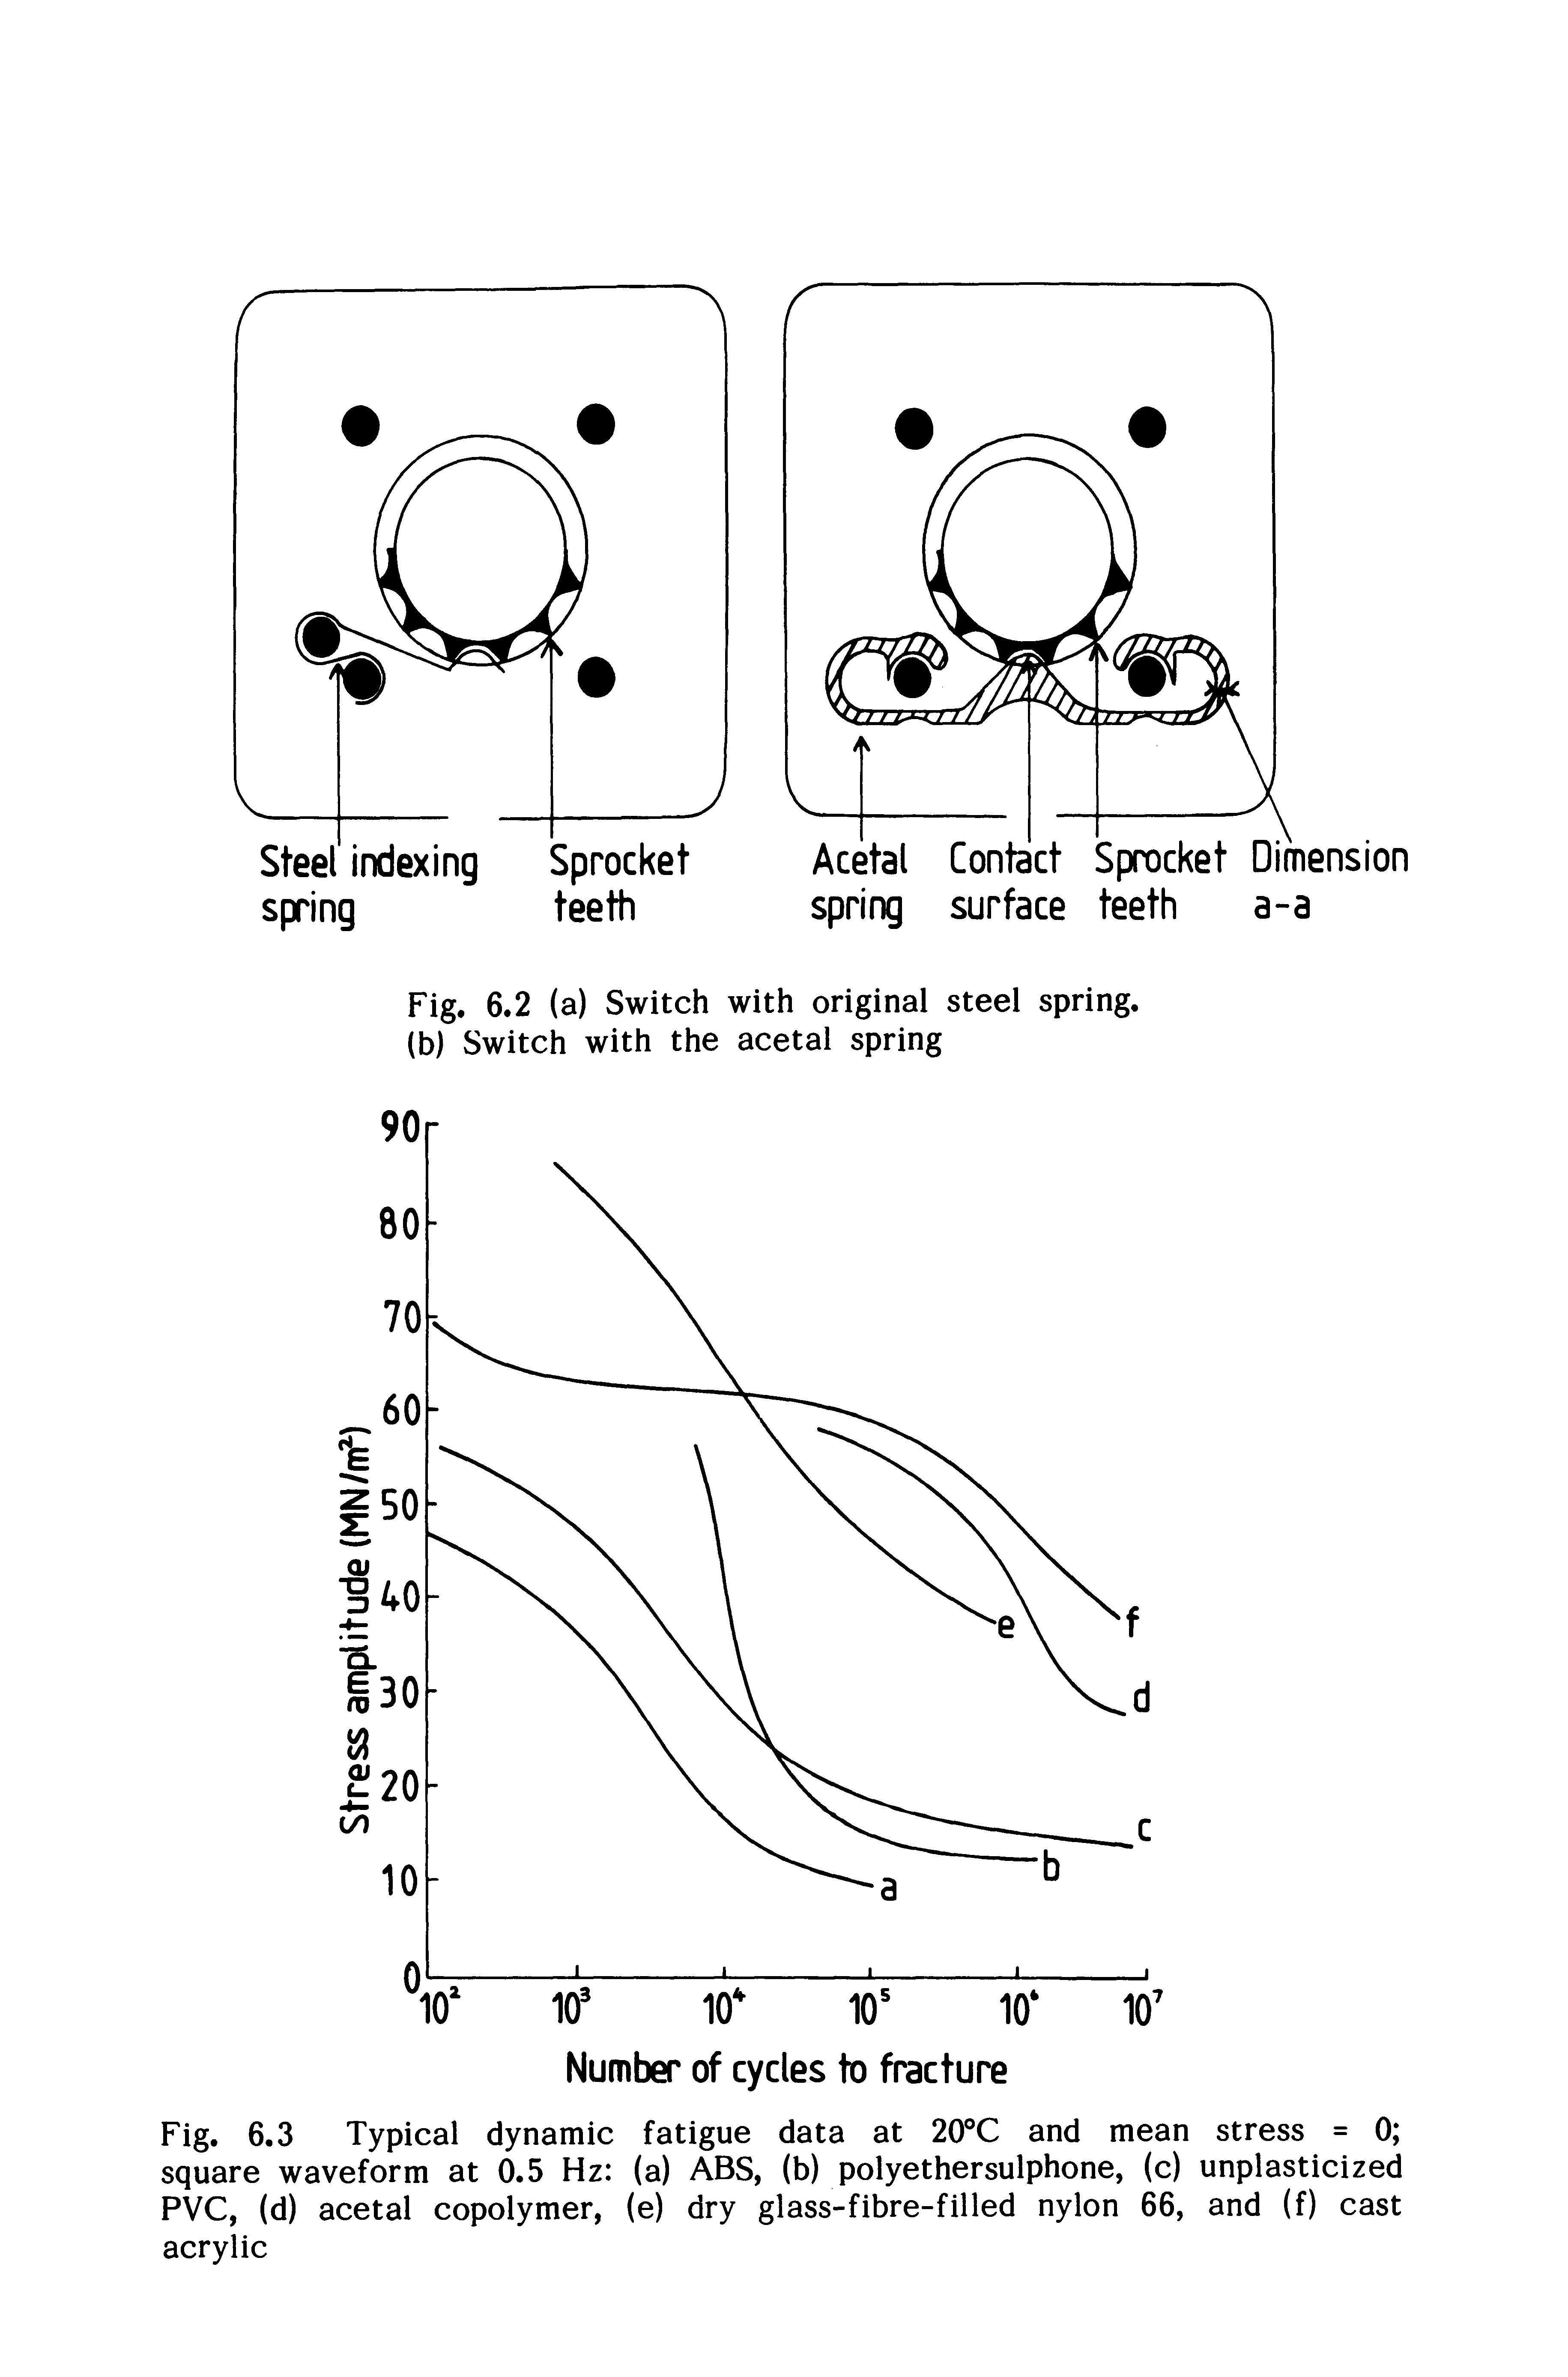 Fig. 6.3 Typical dynamic fatigue data at 20 C and mean stress = 0 square waveform at 0.5 Hz (a) ABS, (b) polyethersulphone, (c) unplasticized PVC, (d) acetal copolymer, (e) dry glass-fibre-filled nylon 66, and (f) cast acrylic...